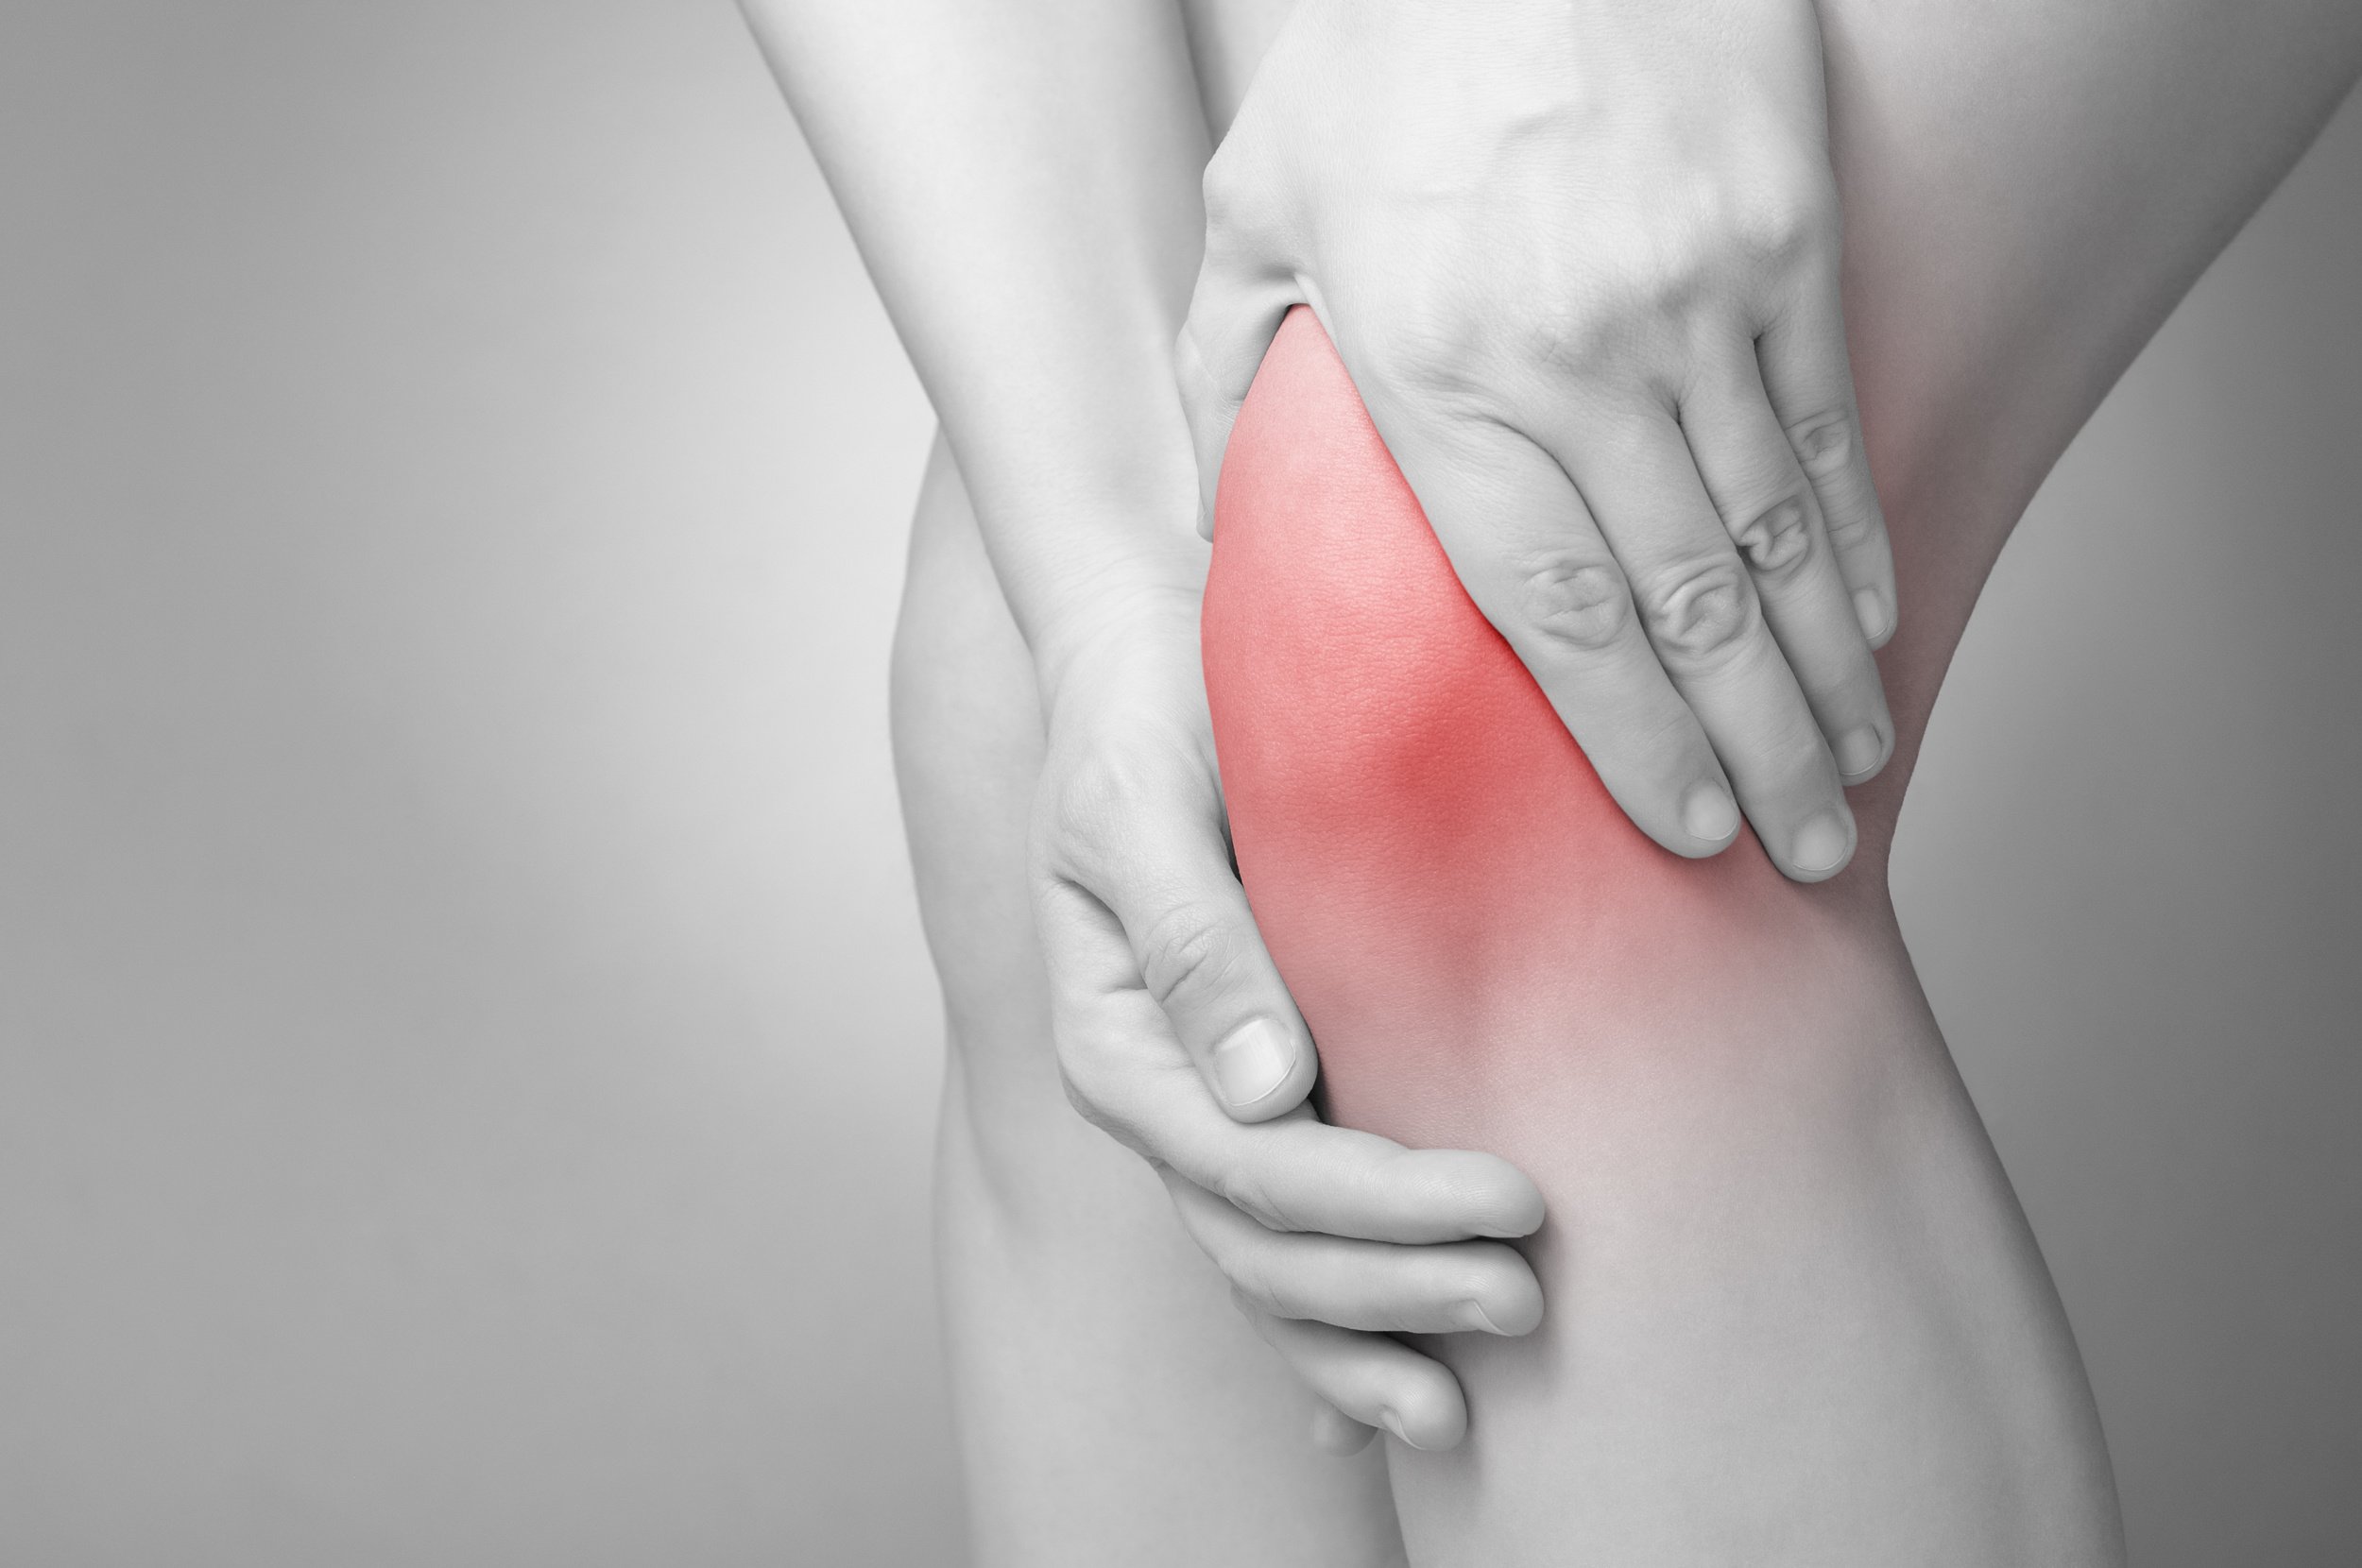 Can I get Social Security Disability for my knee pain?